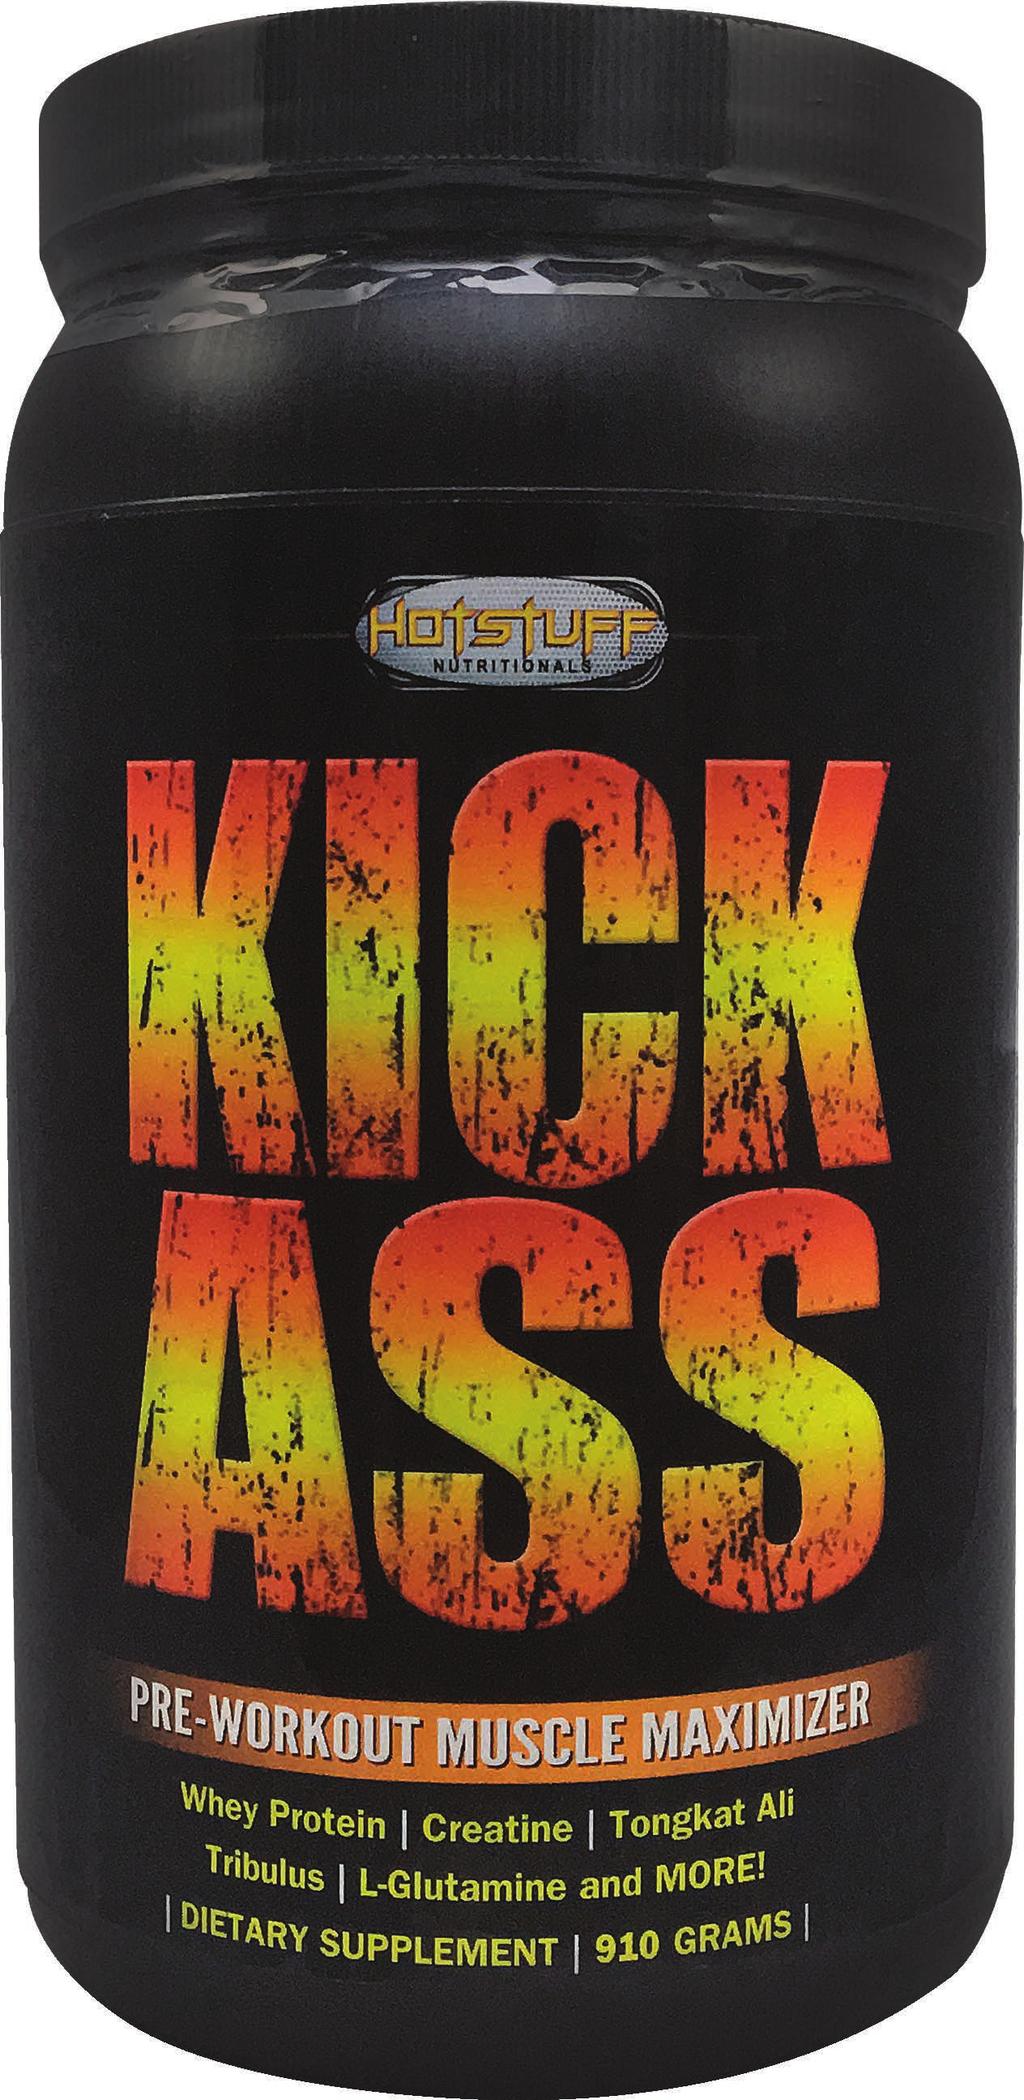 KICK ASS is a scientific blend of everything you need to blast your workouts off the charts and make your muscles explode in size an strength.